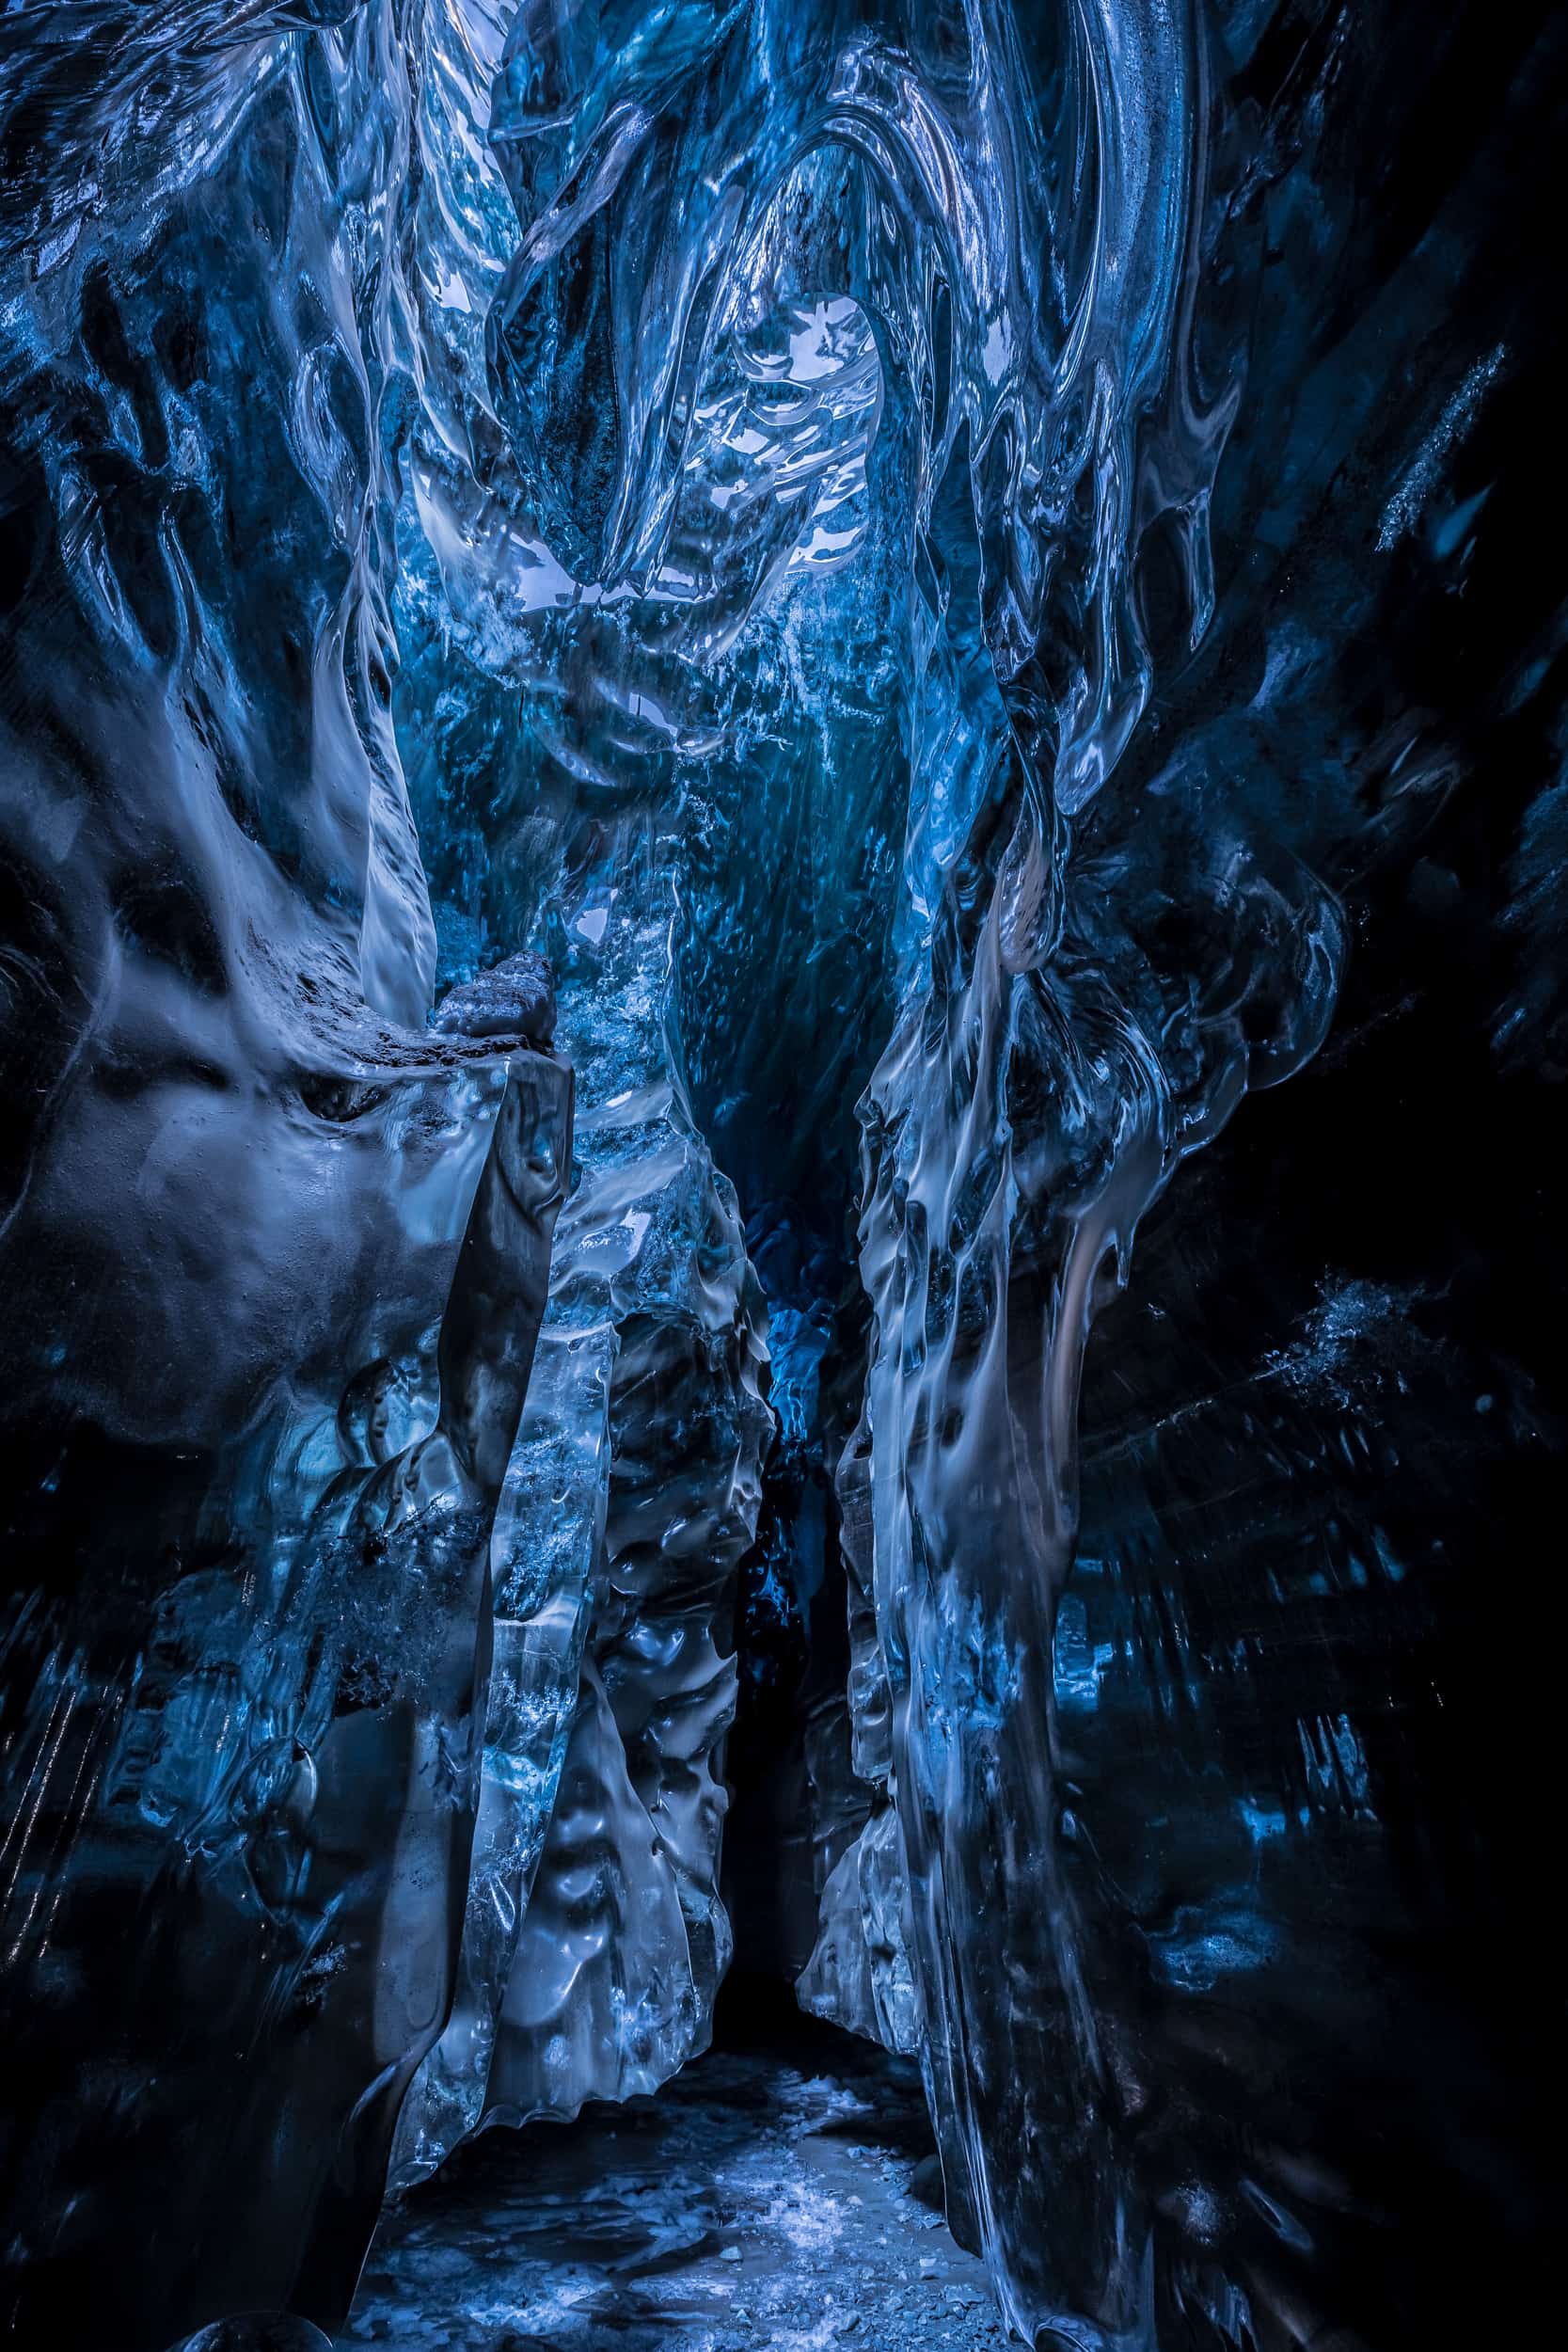 The artpiece 'Anatomy of Ice' by Markus van Hauten which shows an intricately patterned ice cave wall and ceiling.